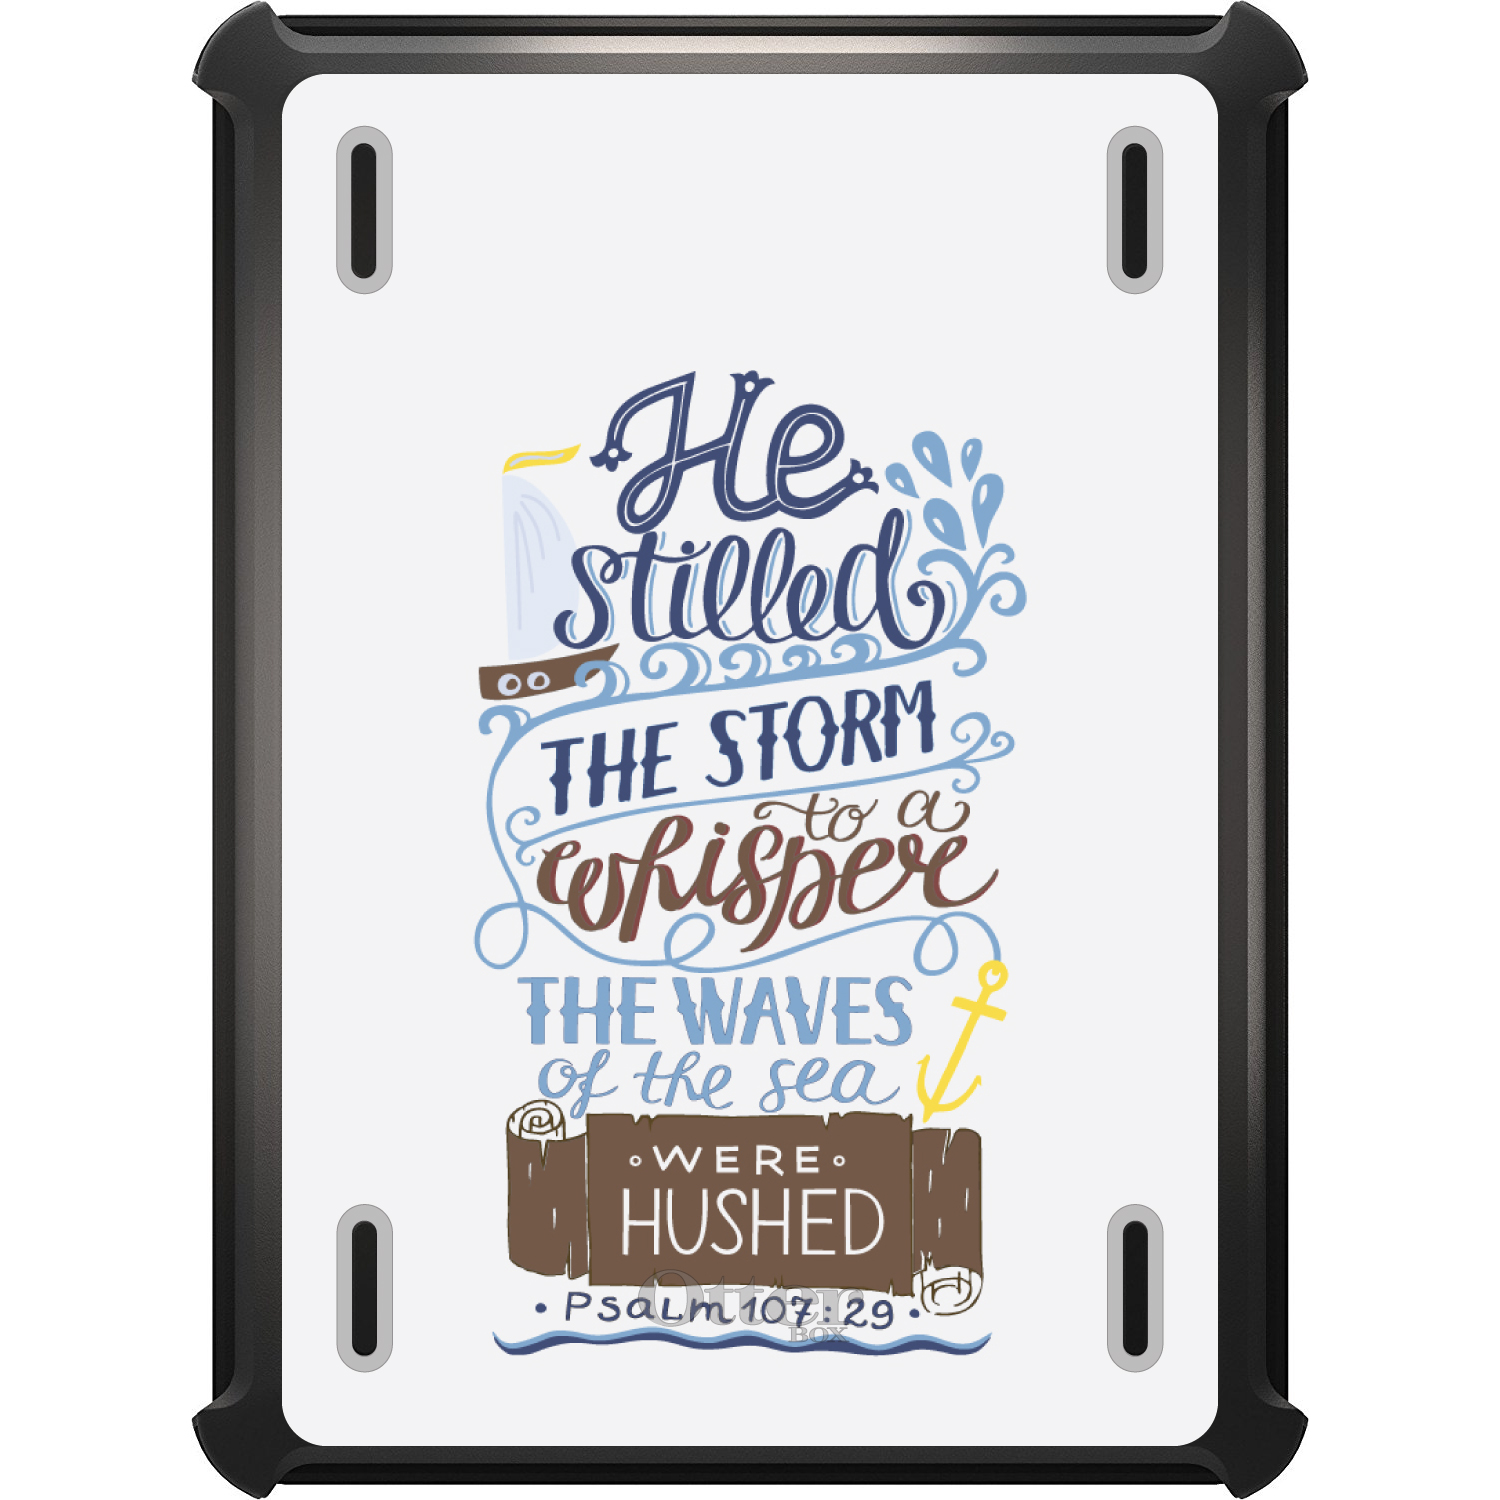 thumbnail 10 - OtterBox Defender for iPad Pro / Air / Mini - Psalm 107:29 - Stilled the Storm